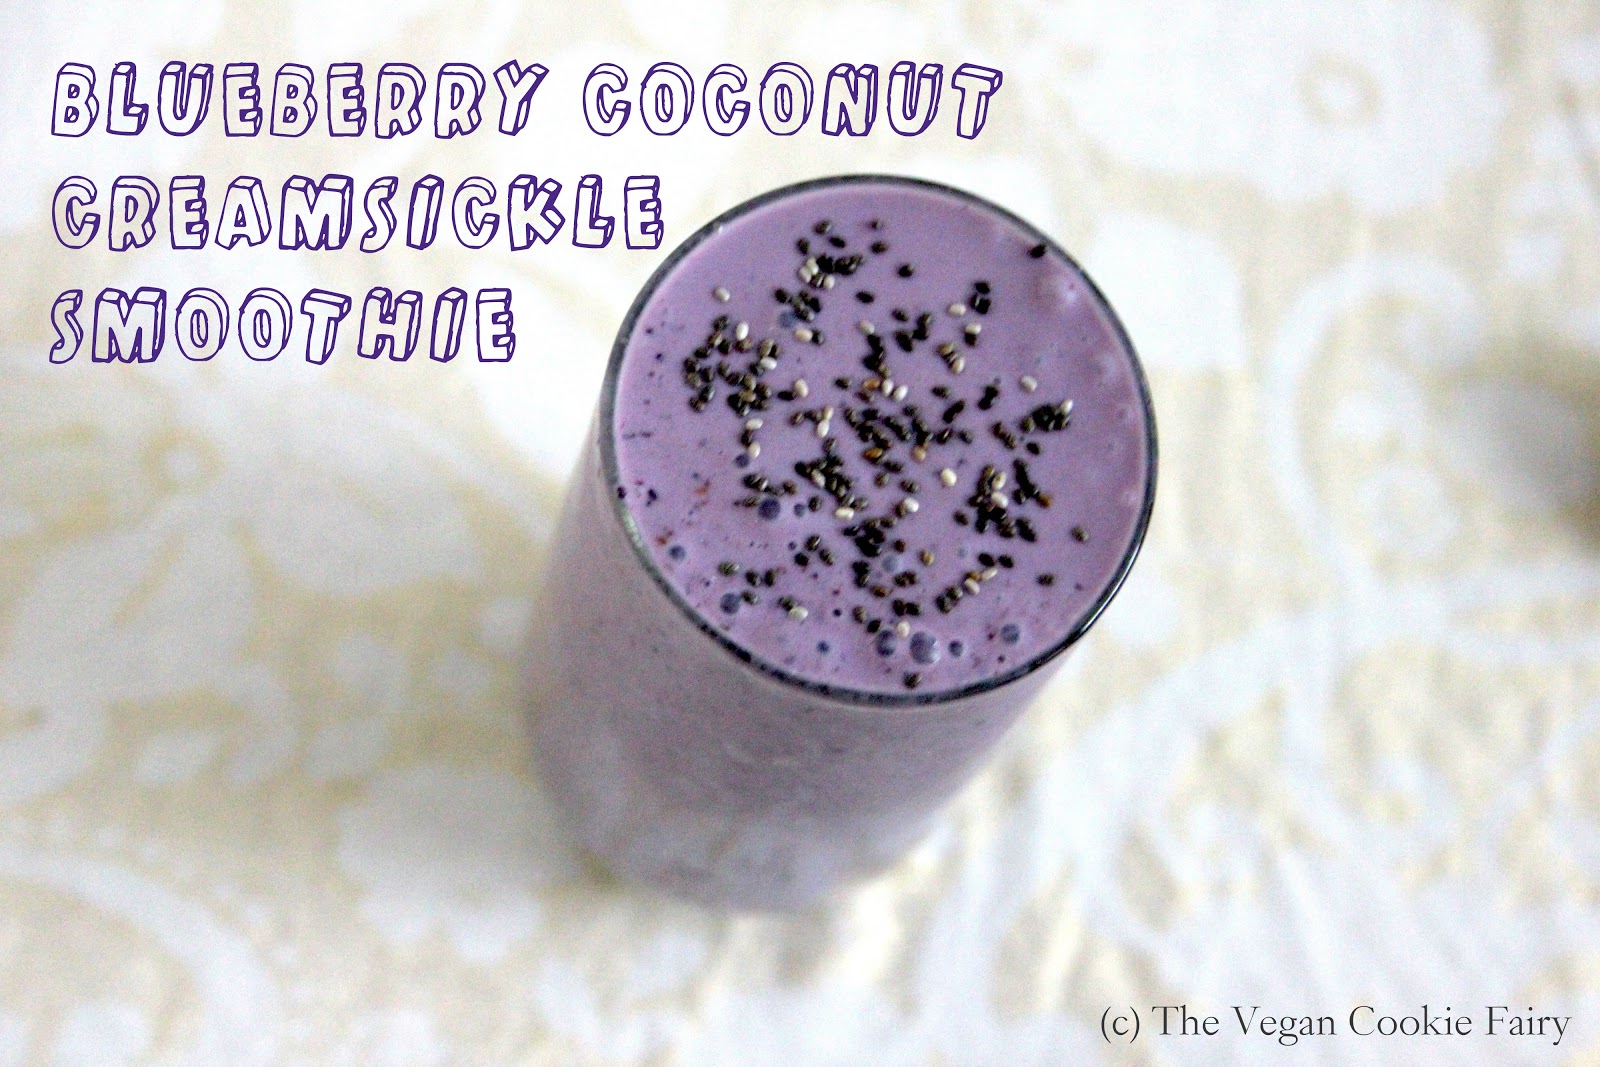 Blueberry Coconut Creamsicle Smoothie